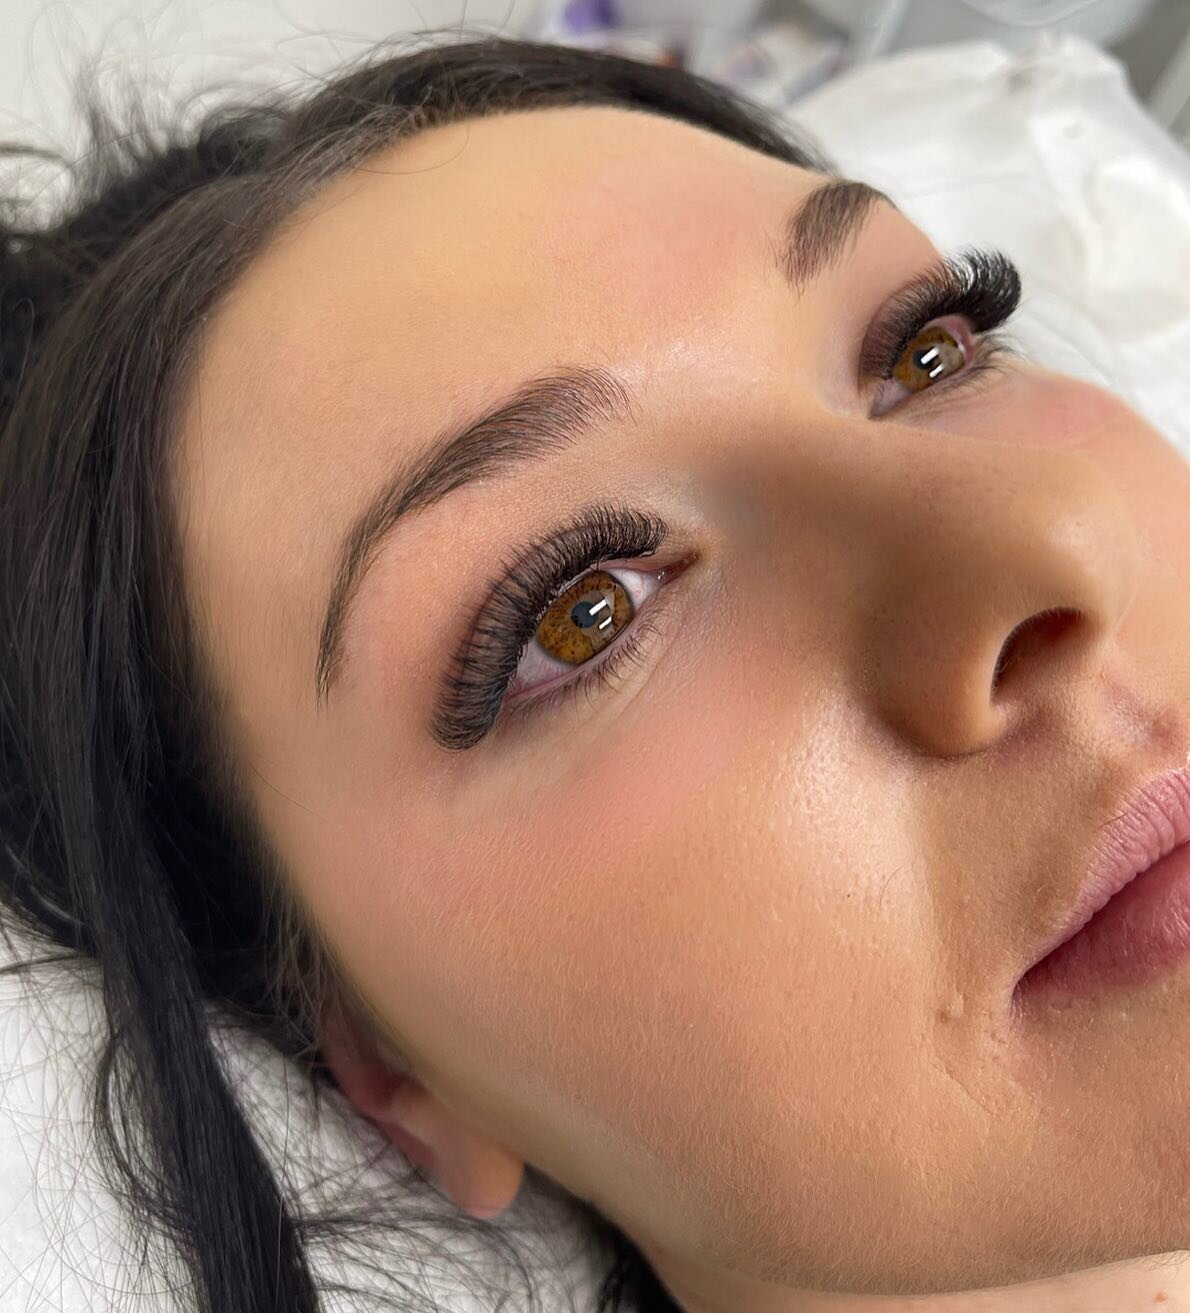 @illuminatebeautyy showcasing perfection in the form of Everyday Volume Lashes 👌🏼
⠀⠀⠀⠀⠀⠀⠀⠀⠀
Don&rsquo;t forget to pre book with artists Alyssa and Tatiana for event lashes and brows or you will miss out!